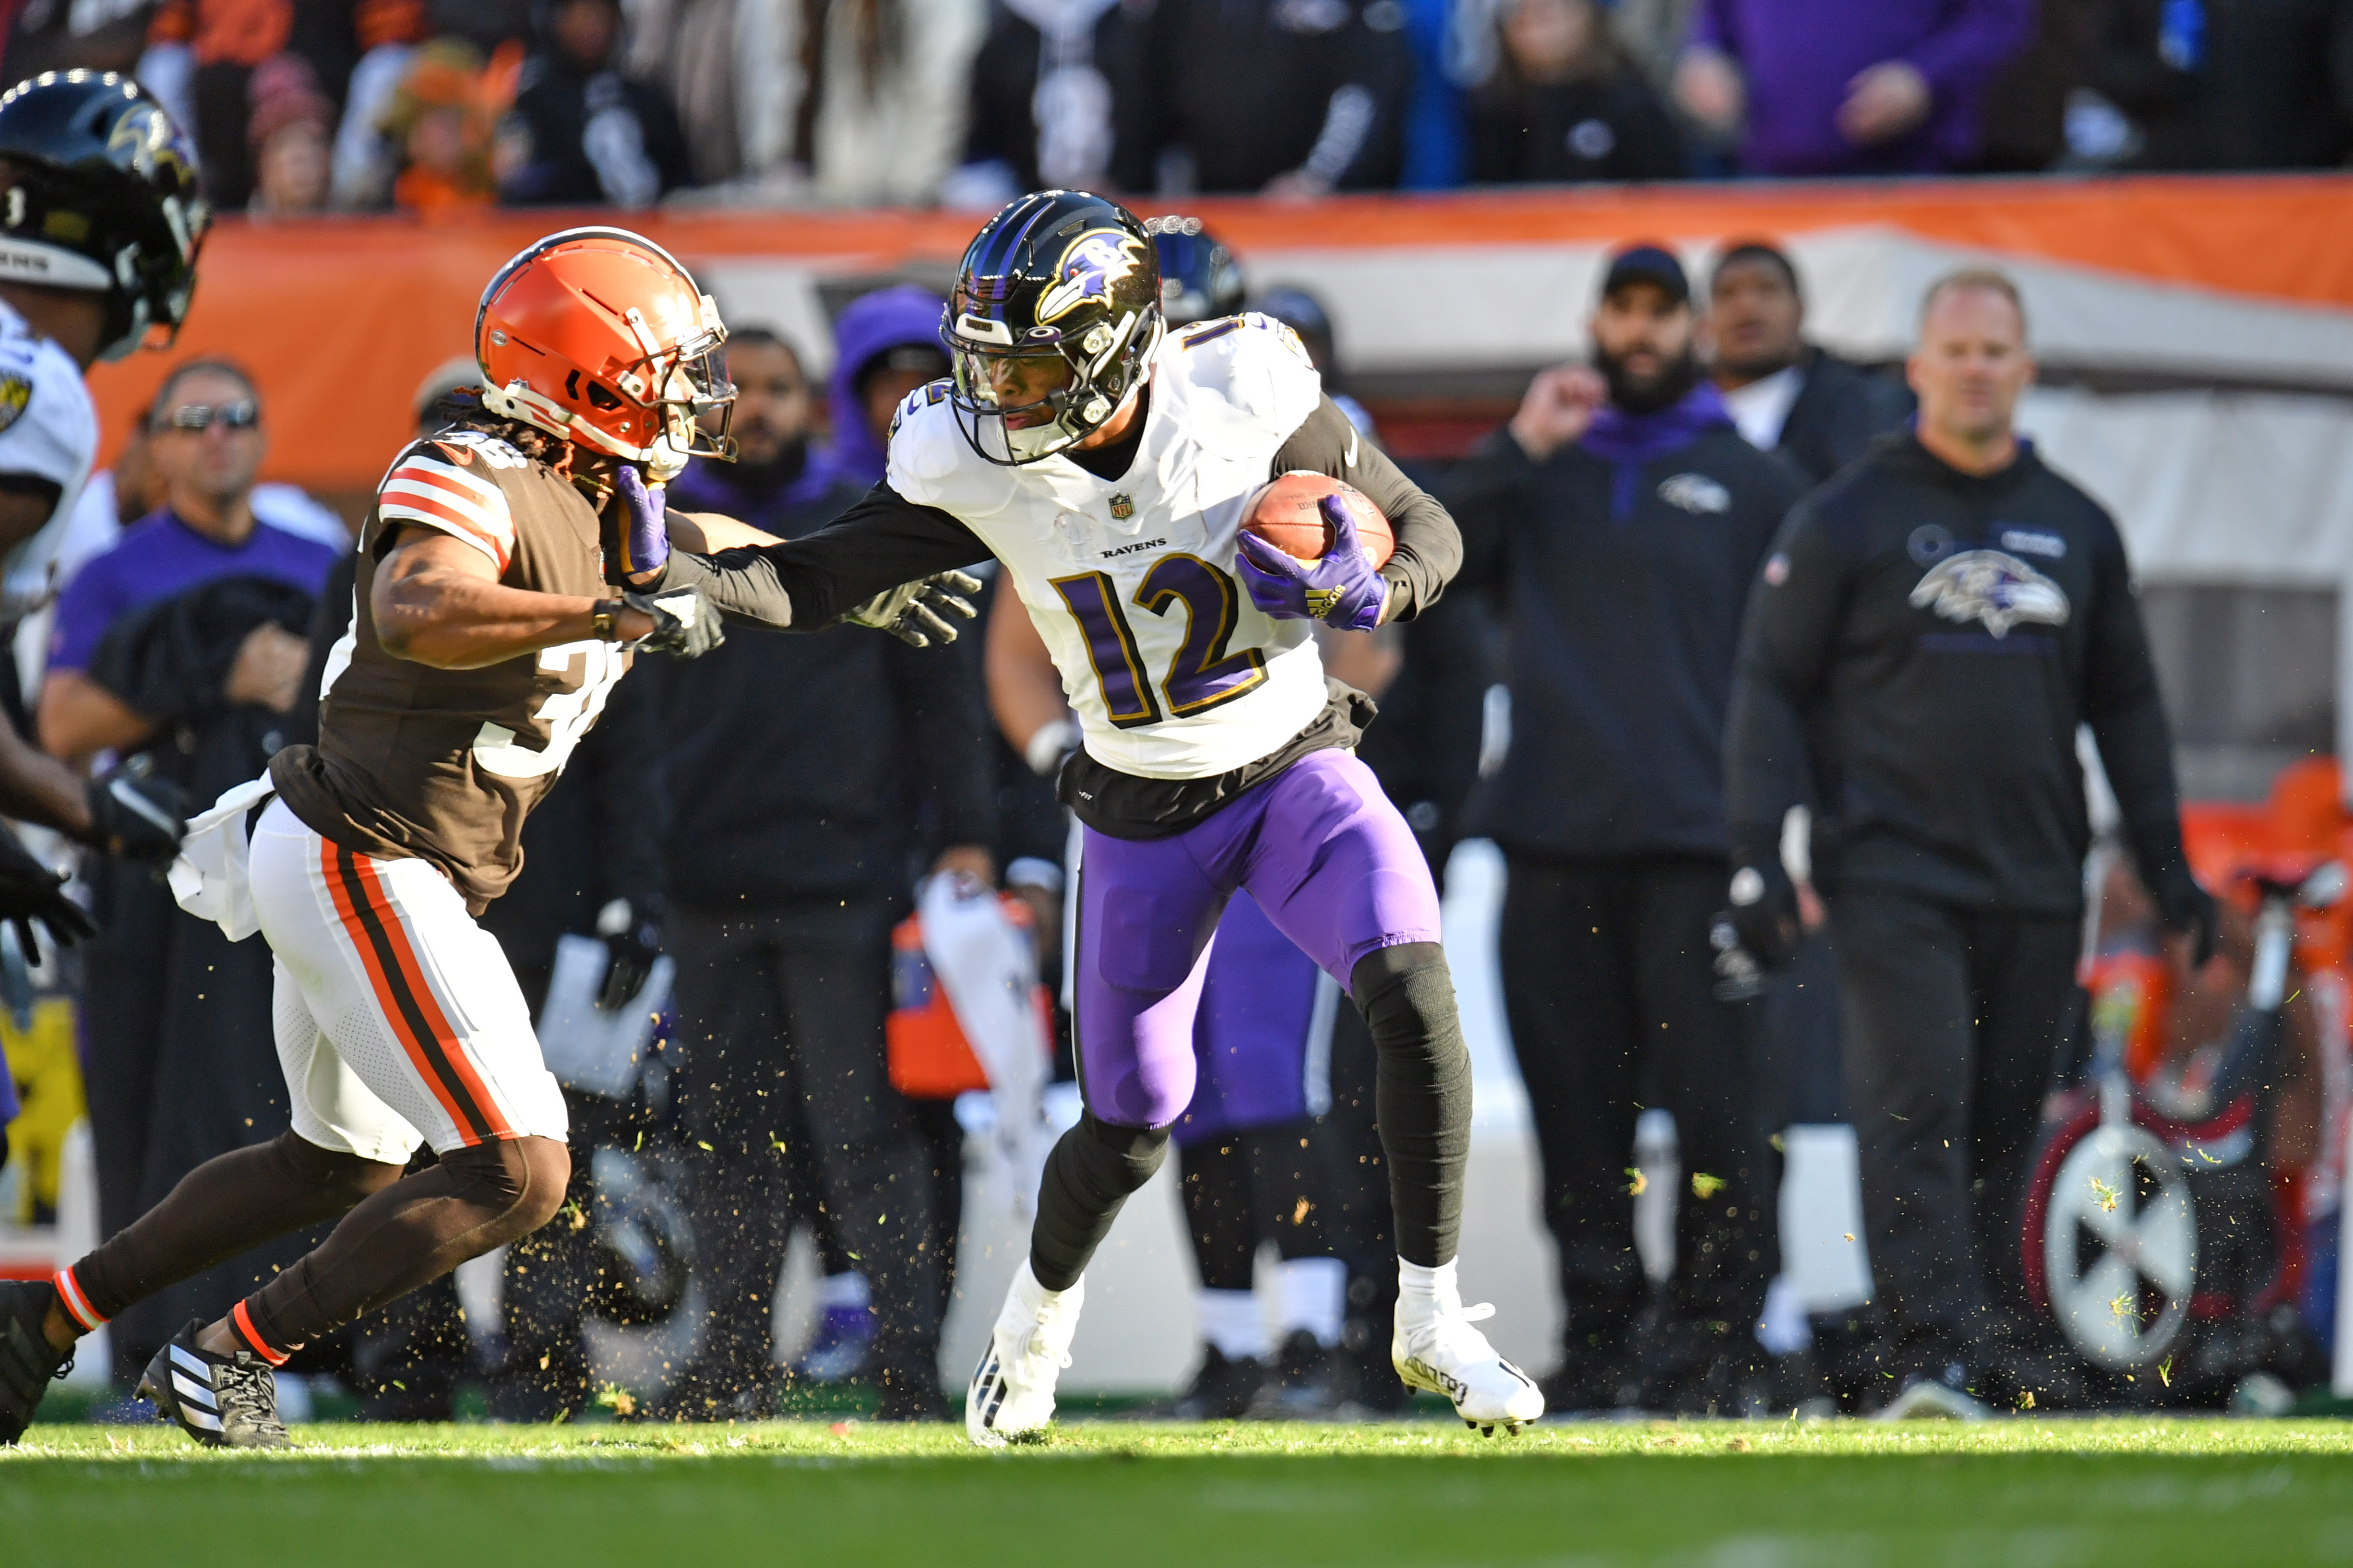 Cornerback M.J. Stewart #36 of the Cleveland Browns tries to tackle wide receiver Rashod Bateman #12 of the Baltimore Ravens during the first half at FirstEnergy Stadium on December 12, 2021 in Cleveland, Ohio.